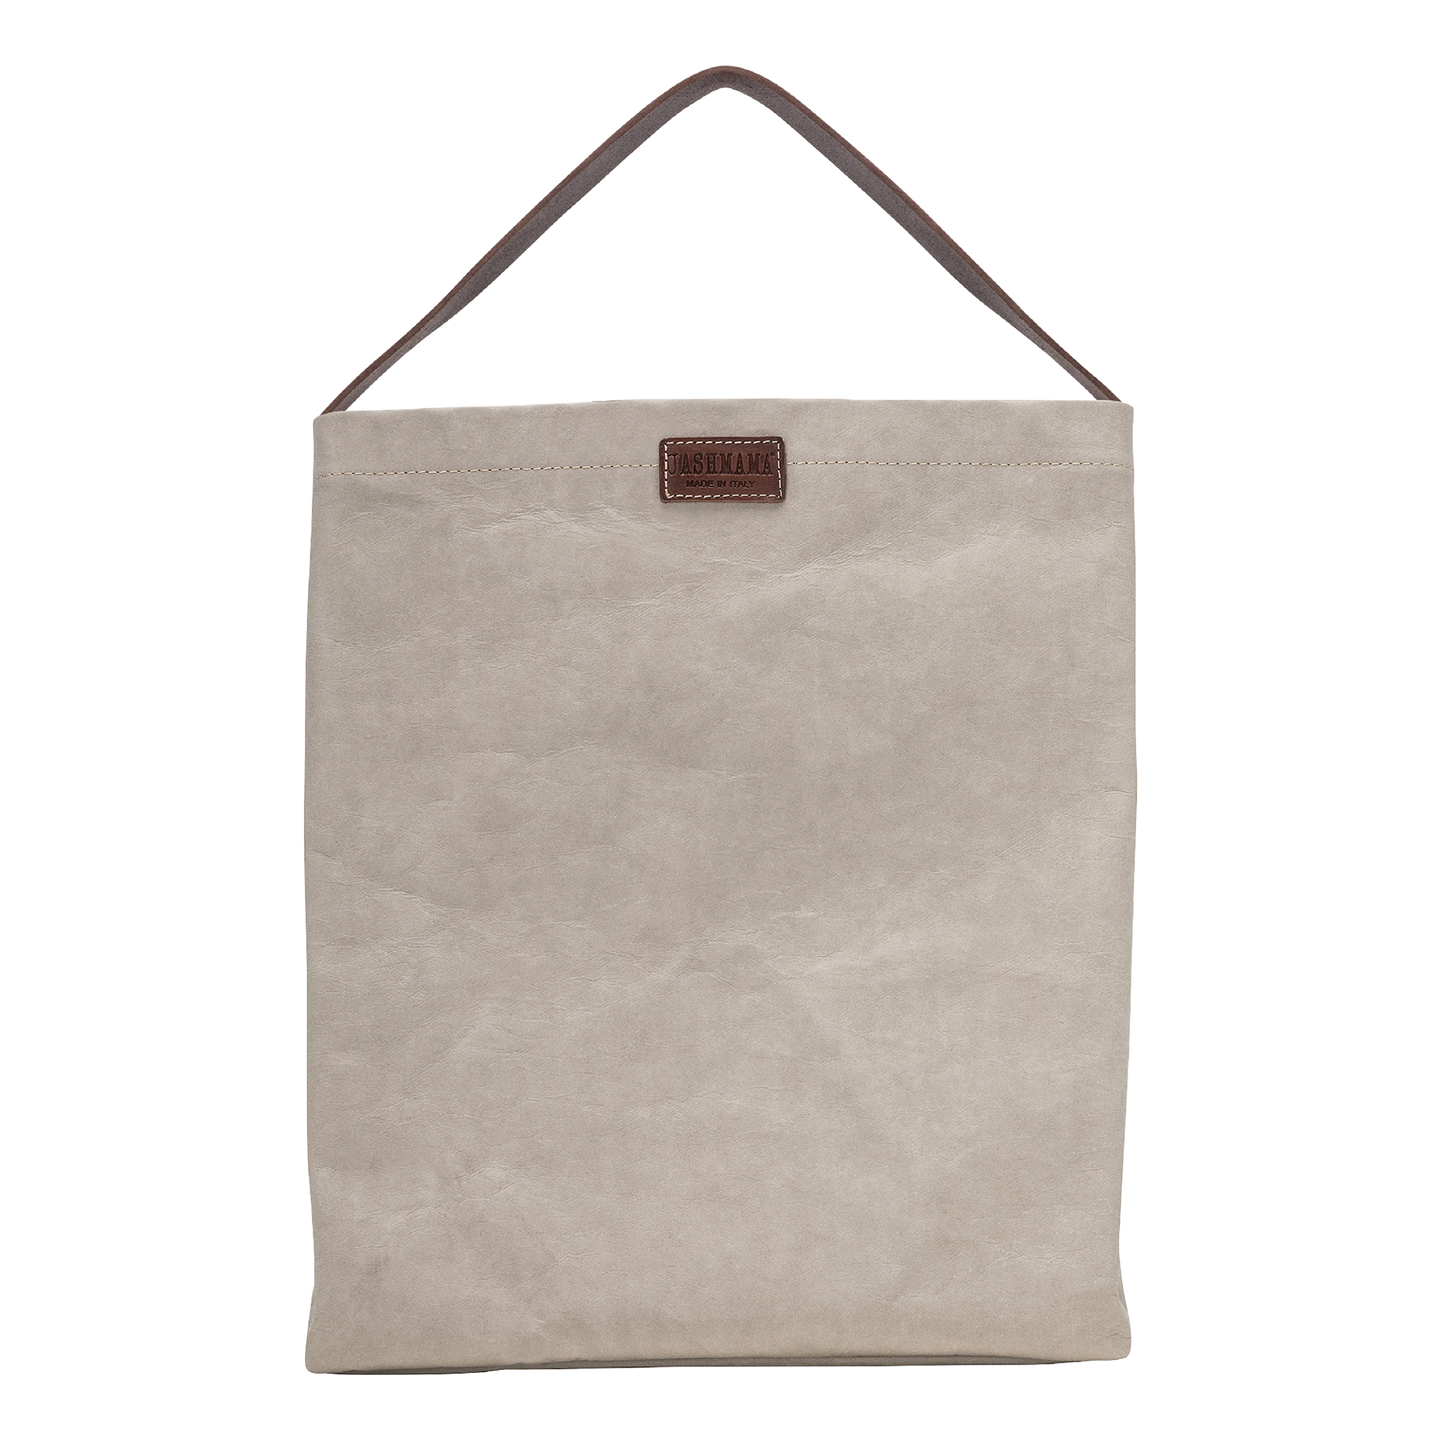 A cream washable paper handbag is shown from the front. It features a singular top handle in chocolate brown, and a brown UASHMAMA logo stamp on the front.